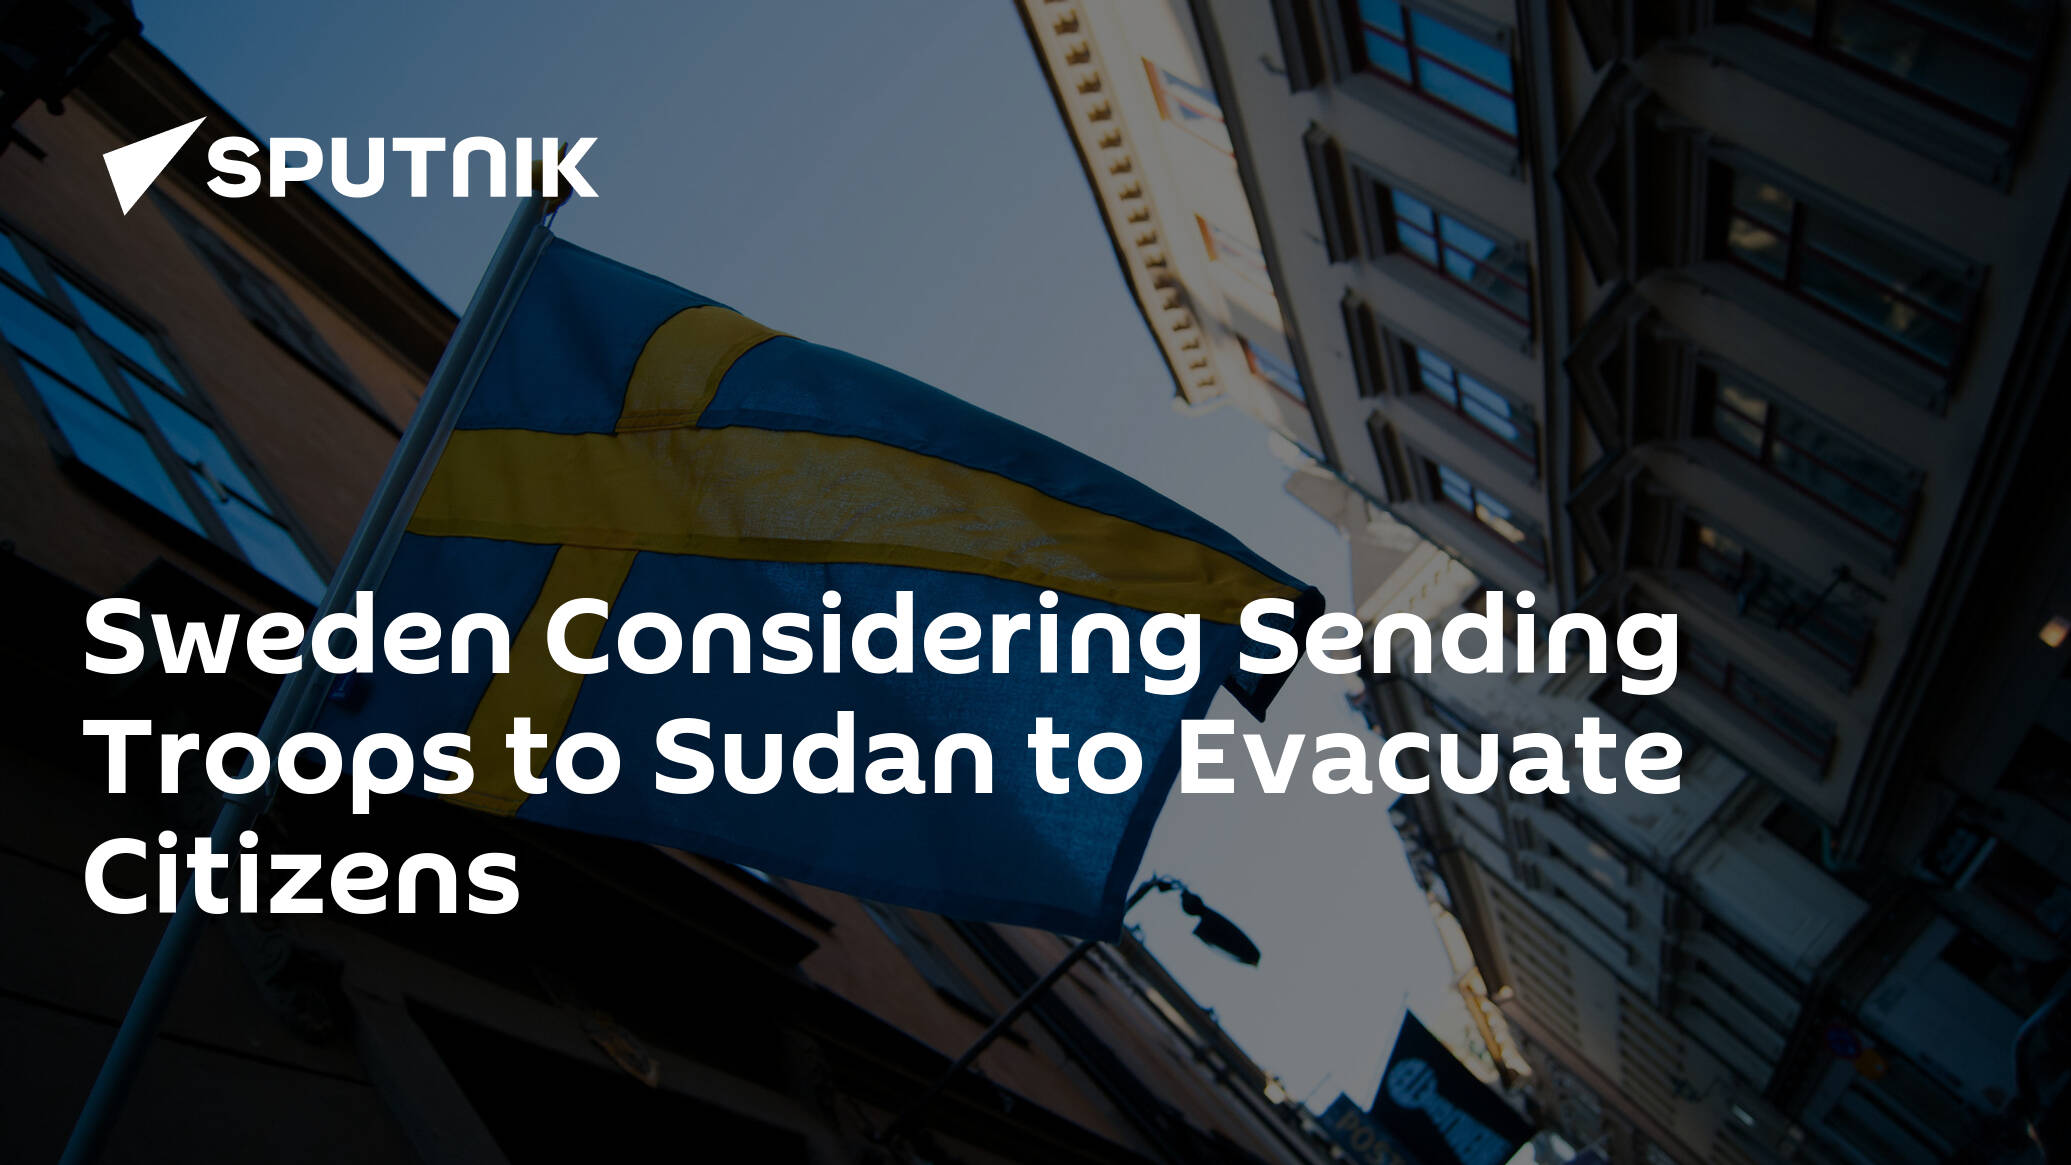 Sweden Considering Sending Troops to Sudan to Evacuate Citizens